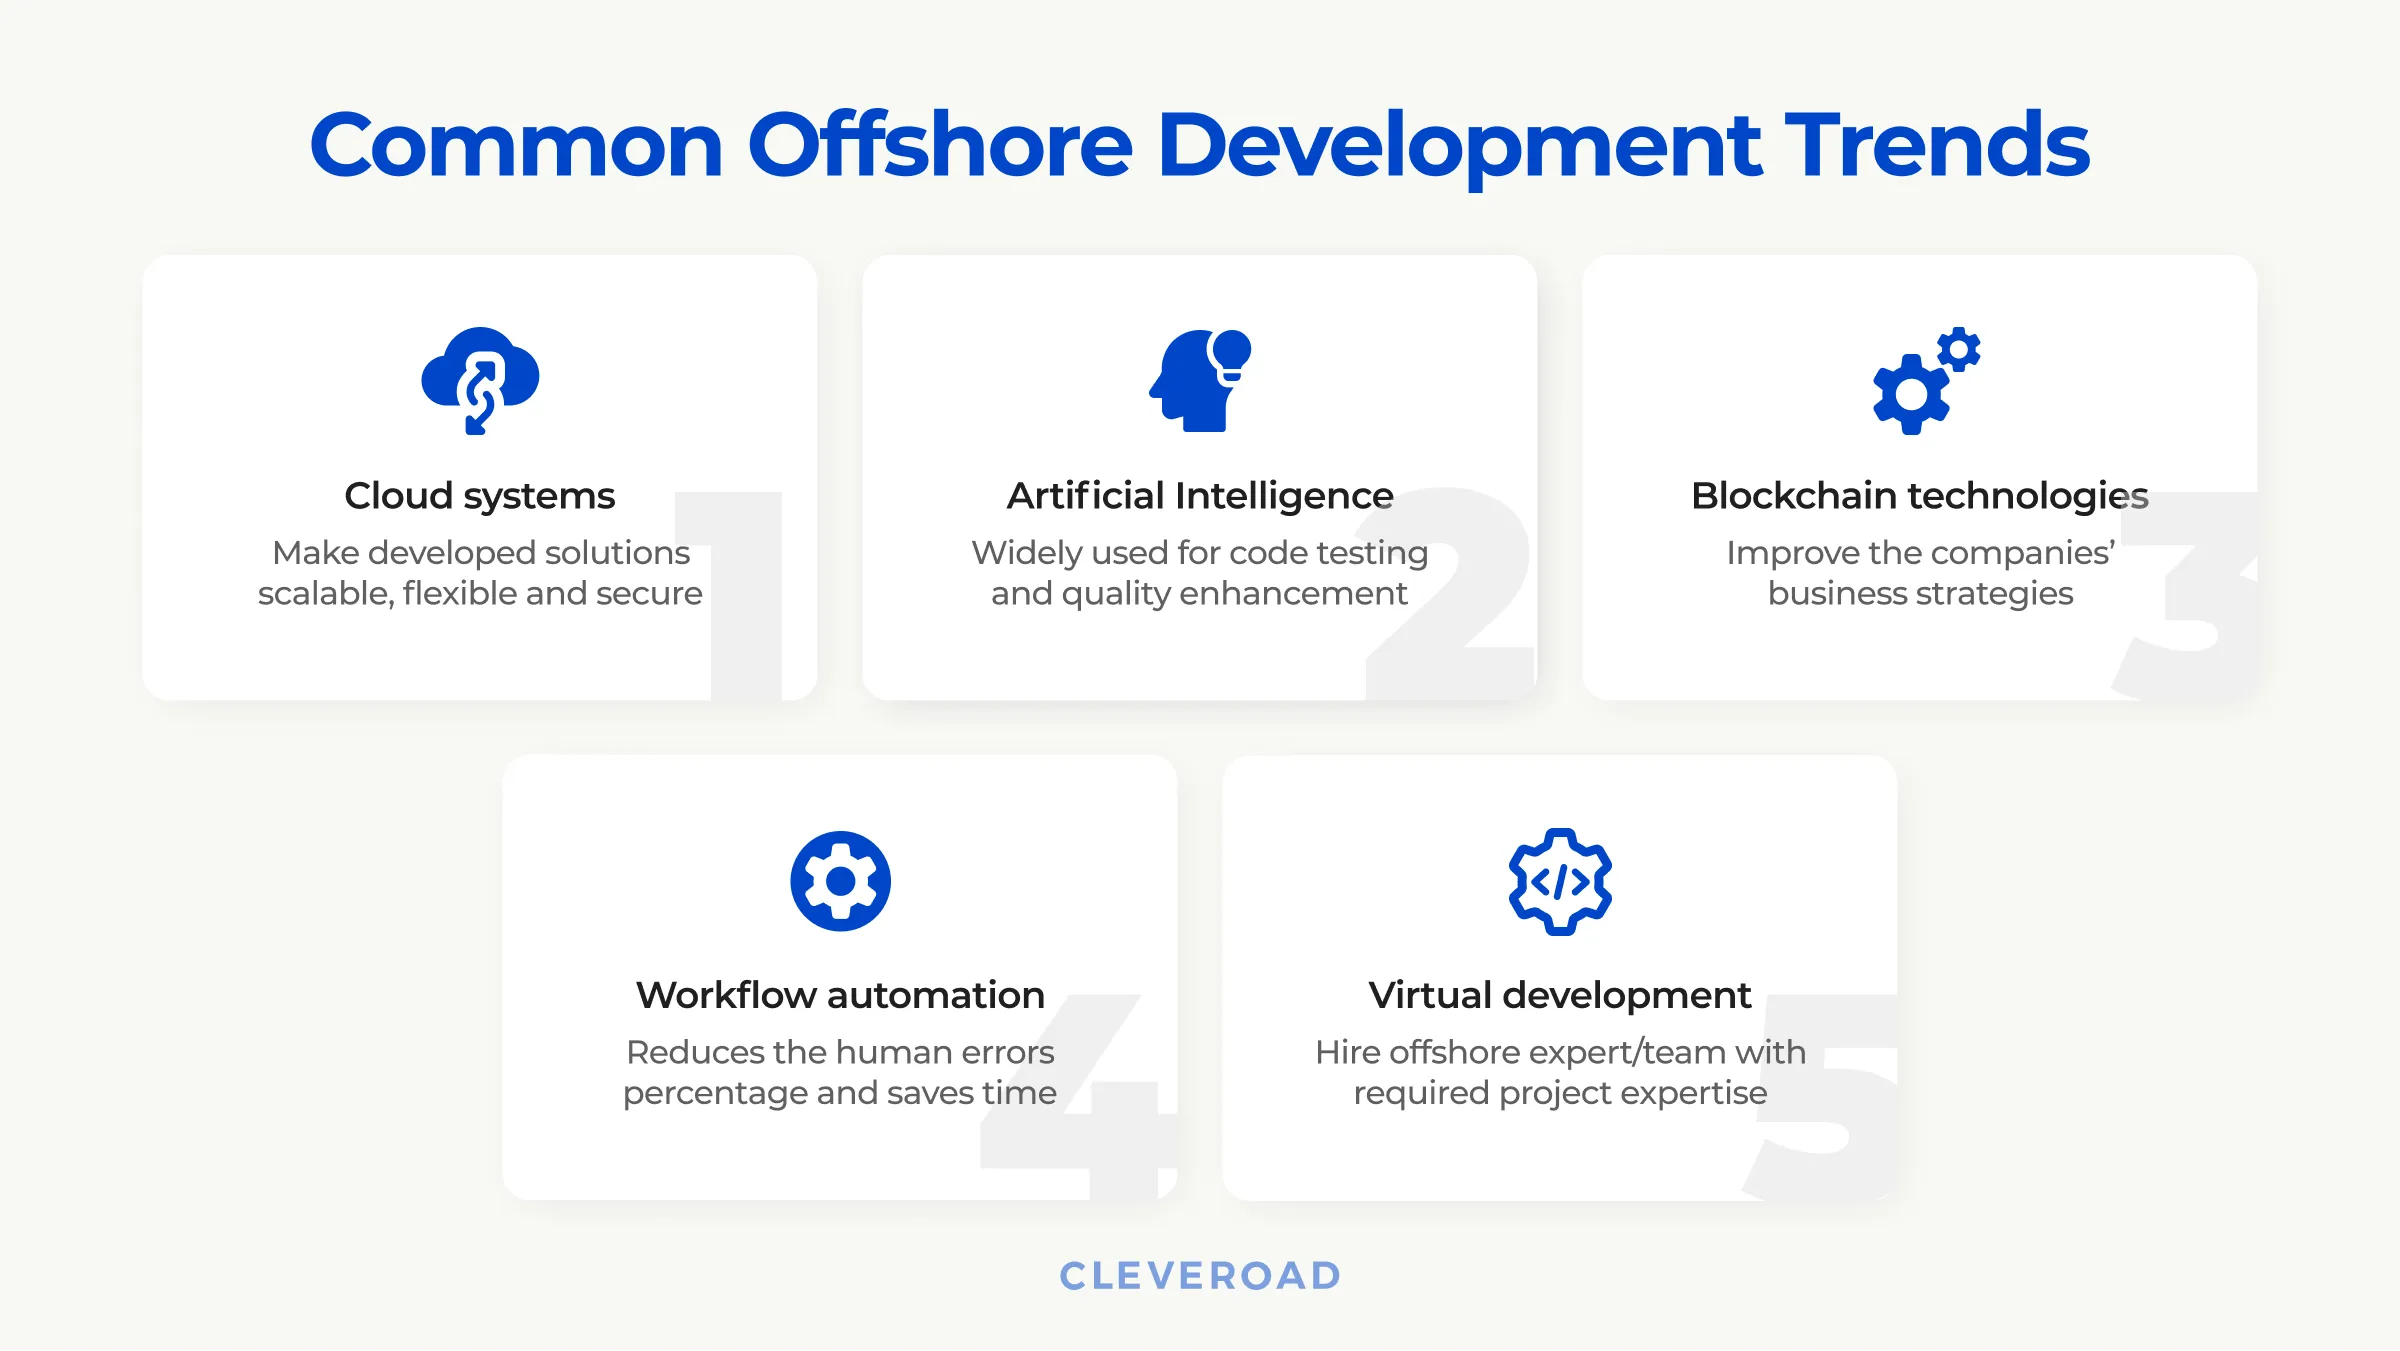 The most in-demand offshore development trends